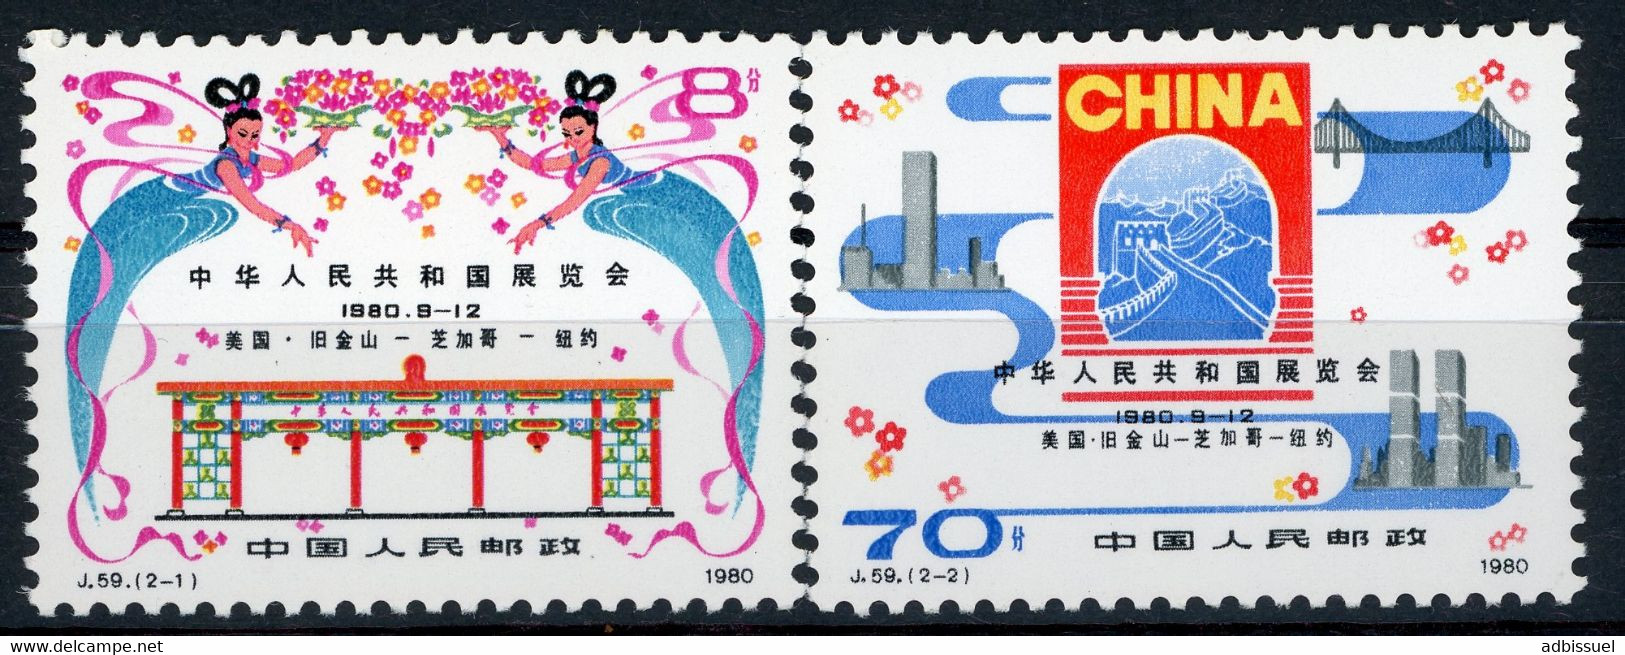 CHINA CHINE 1980 N° 2366 + 2367. Value (cote) 23 € MNH. VG/TB. Chinese Trade Show (Exposition Commerciale Chinoise) - Neufs